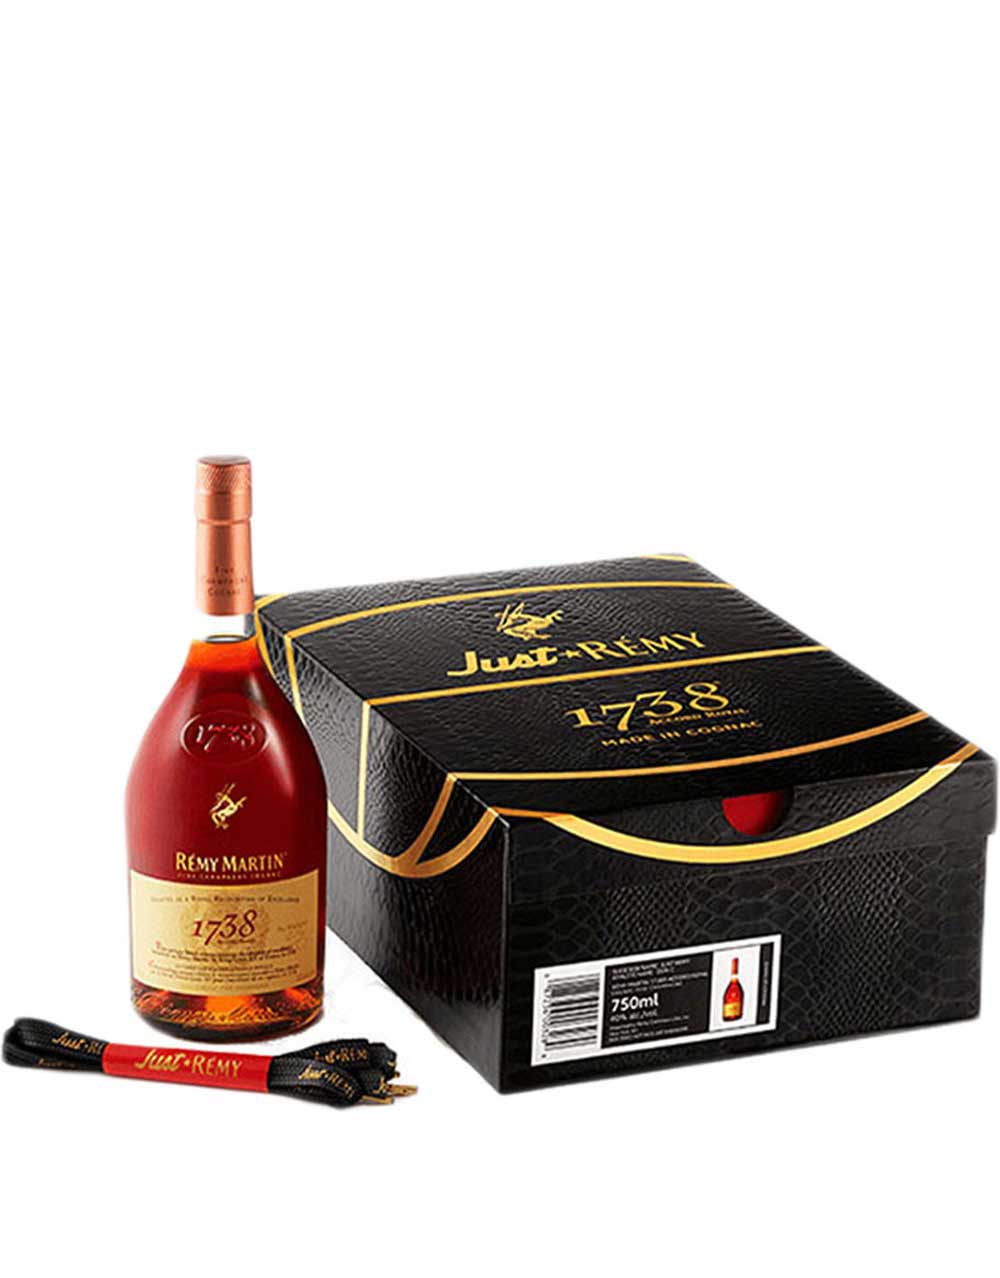 Remy Martin 1738 Limited Edition Sneaker Box